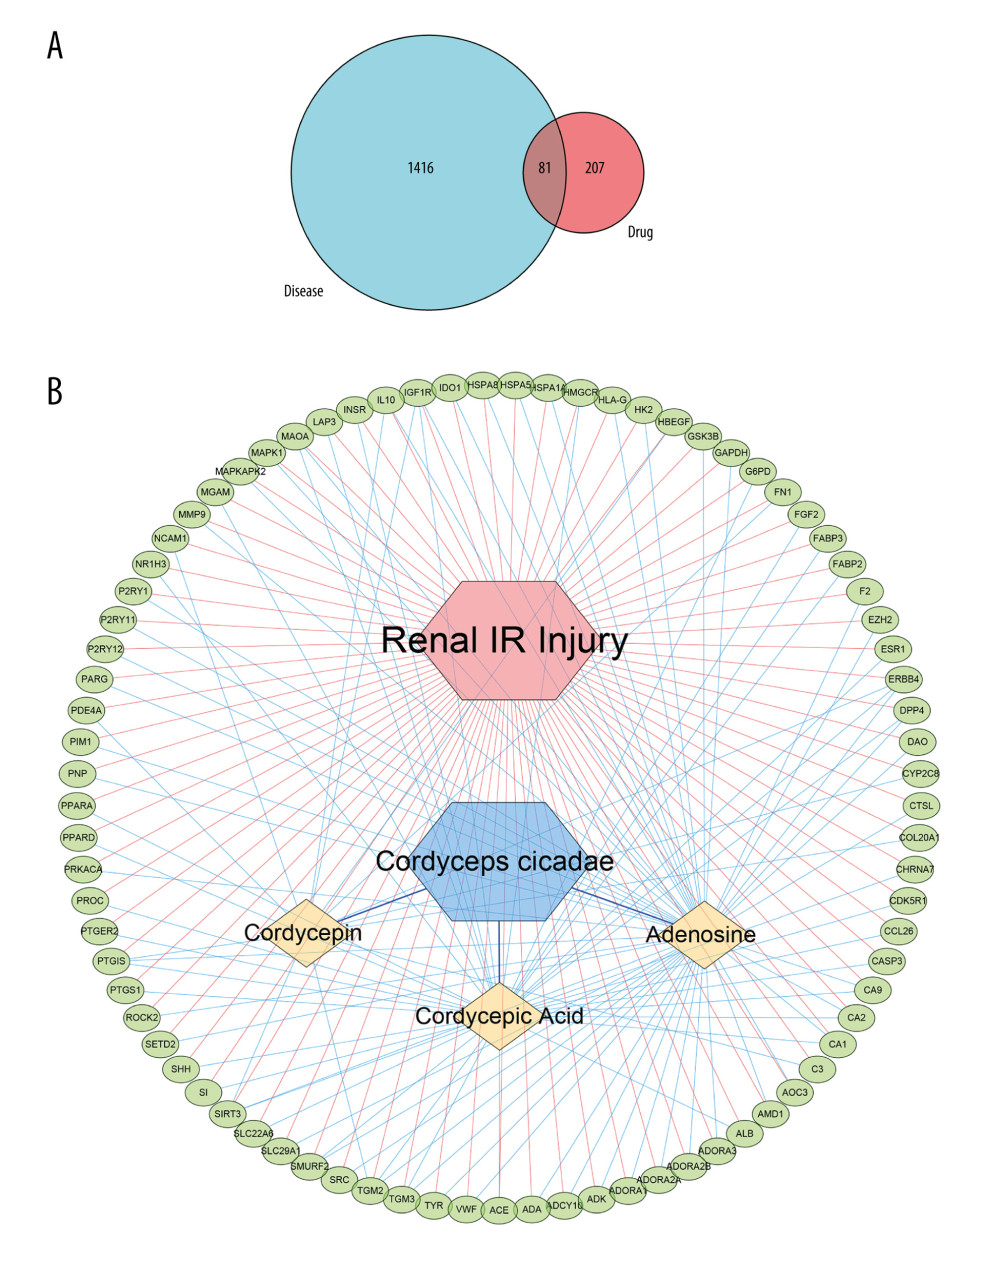 (A) The blue circle represents the related targets of renal ischemia/reperfusion injury (IRI), the red circle represents the related targets of Cordyceps cicadae, and the intersecting part of the 2 circles is the potential targets of Cordyceps cicadae acting on renal IRI. Figure created by R 3.6.0 with Rstudio, R: The R Project for Statistical Computing (r-project.org). (B) The ingredient–target (I-T) network in this study. The green nodes represent potential targets associated with renal IRI, the blue nodes represent Cordyceps cicadae, and the yellow nodes represent active ingredients of Cordyceps cicadae; the edges indicate the interactions among the nodes. Figure created by Cytoscape 3.7.2 software. IR – ischemia/reperfusion.